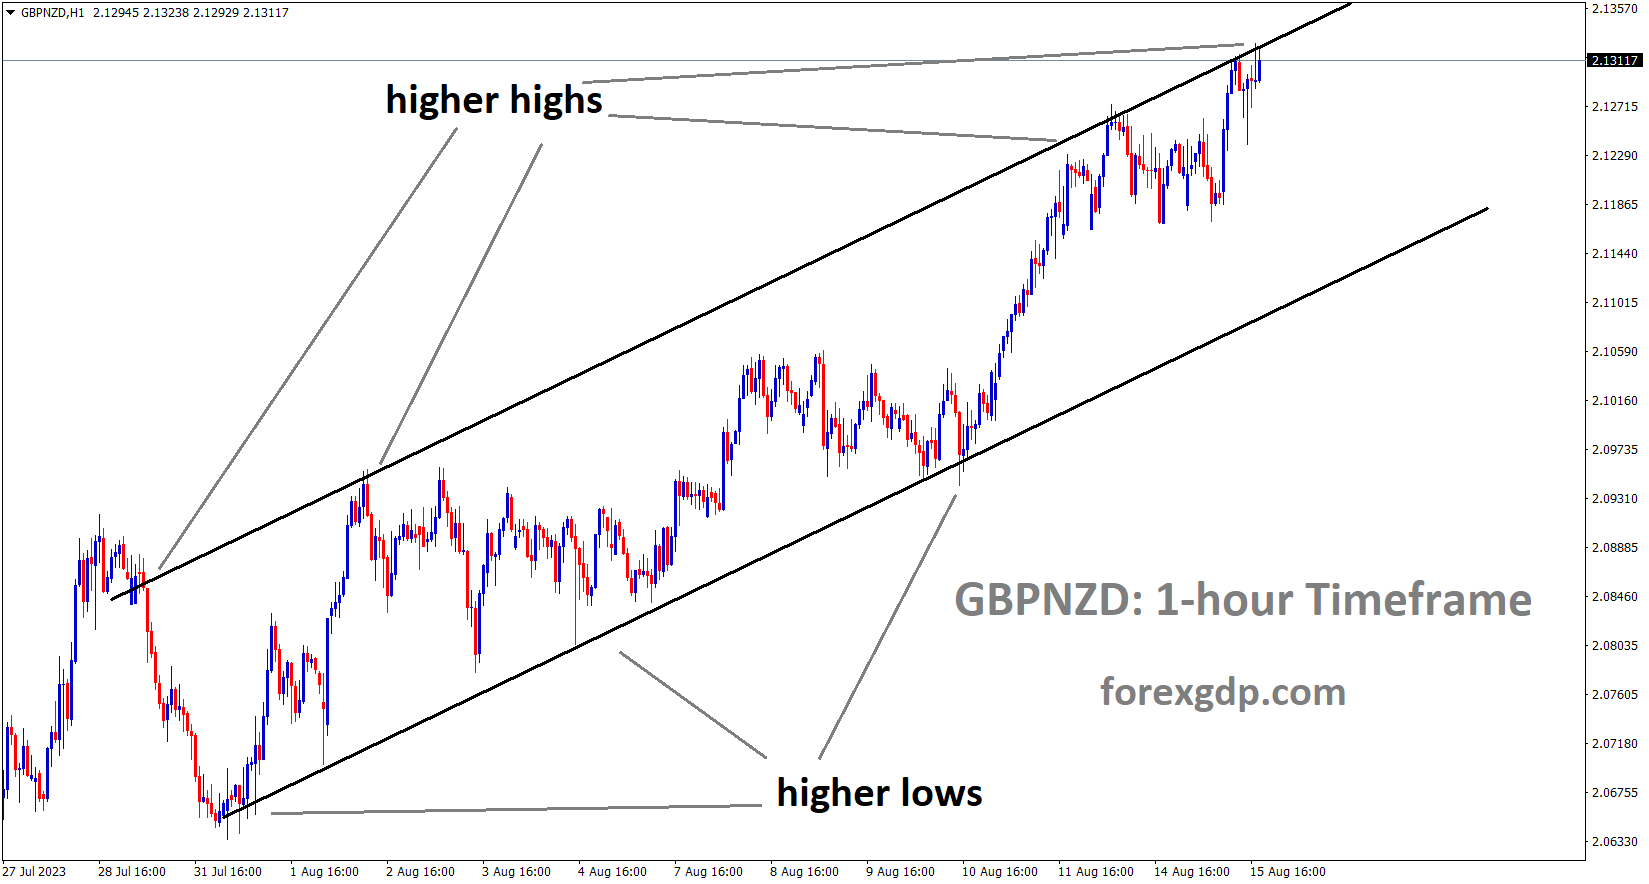 GBPNZD H1 TF Analysis Market is moving in an Ascending channel and the market has reached the higher high area of the channel